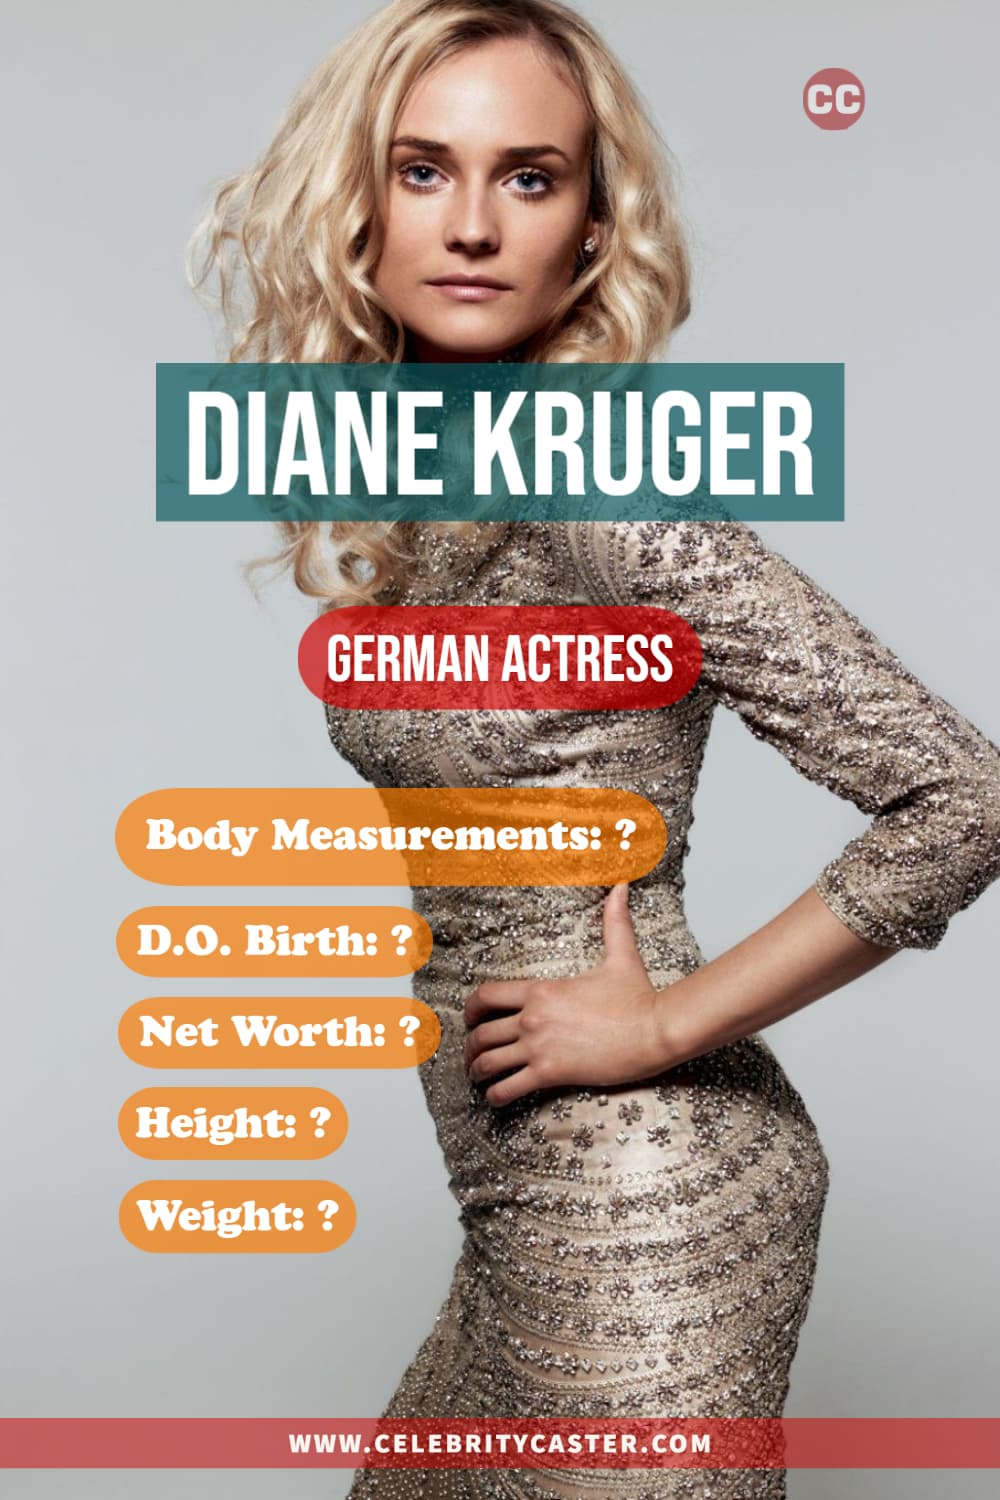 Actress, Beautiful German Actresses, Diane Kruger age, Diane Kruger Body Statistics, Diane Kruger height, Diane Kruger Measurements, Diane Kruger weight, Female Actresses, Female German Actresses, German Celebrities, German Drama Actresses, German Film Actresses, German Girls, German Movie Actresses, German Women, Germany, Model, Most Beautiful Girls from Germany